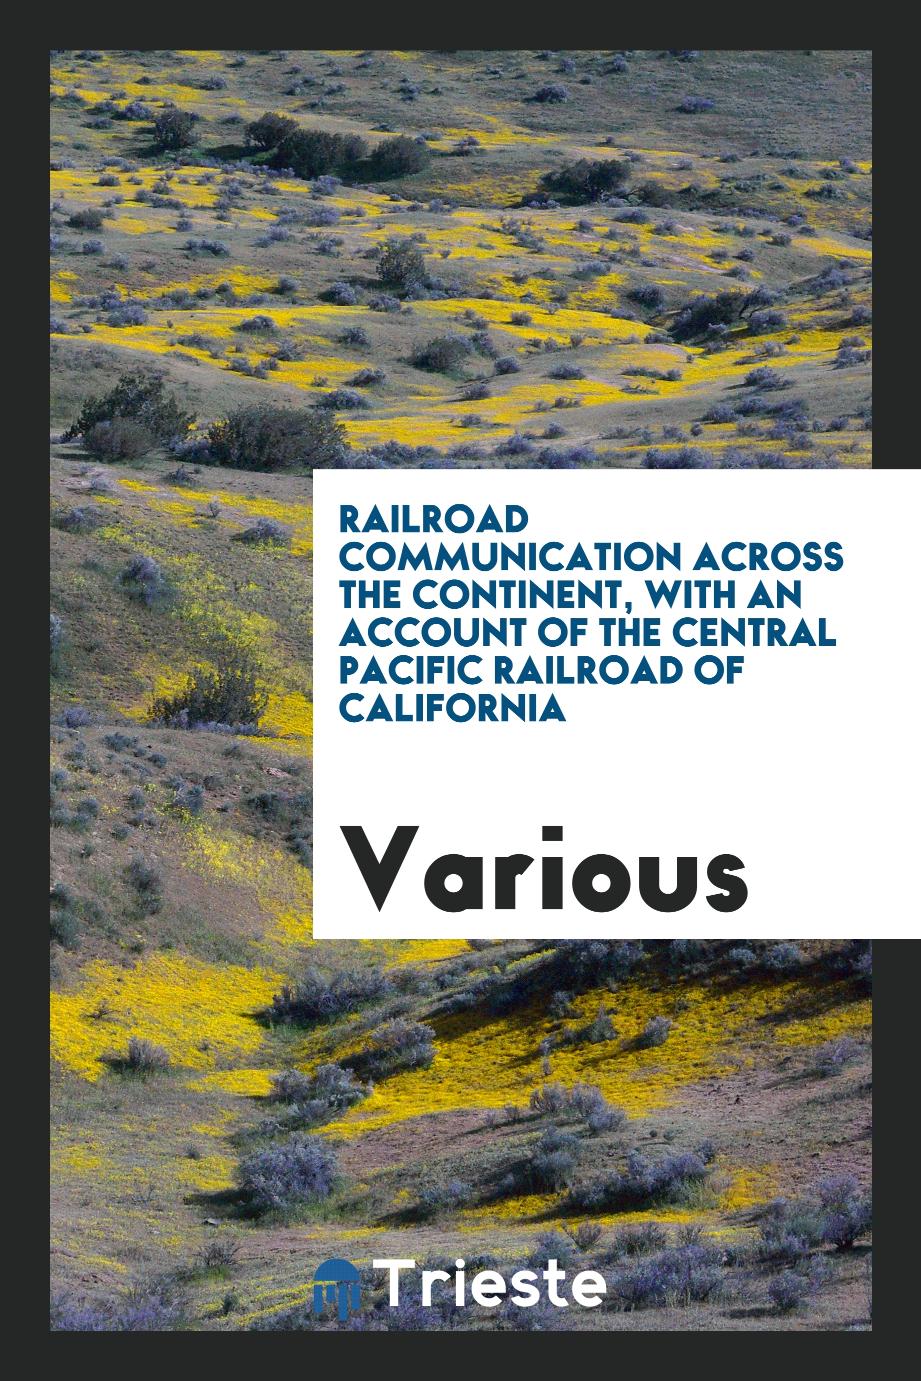 Railroad Communication Across the Continent, with an Account of the Central Pacific Railroad of California